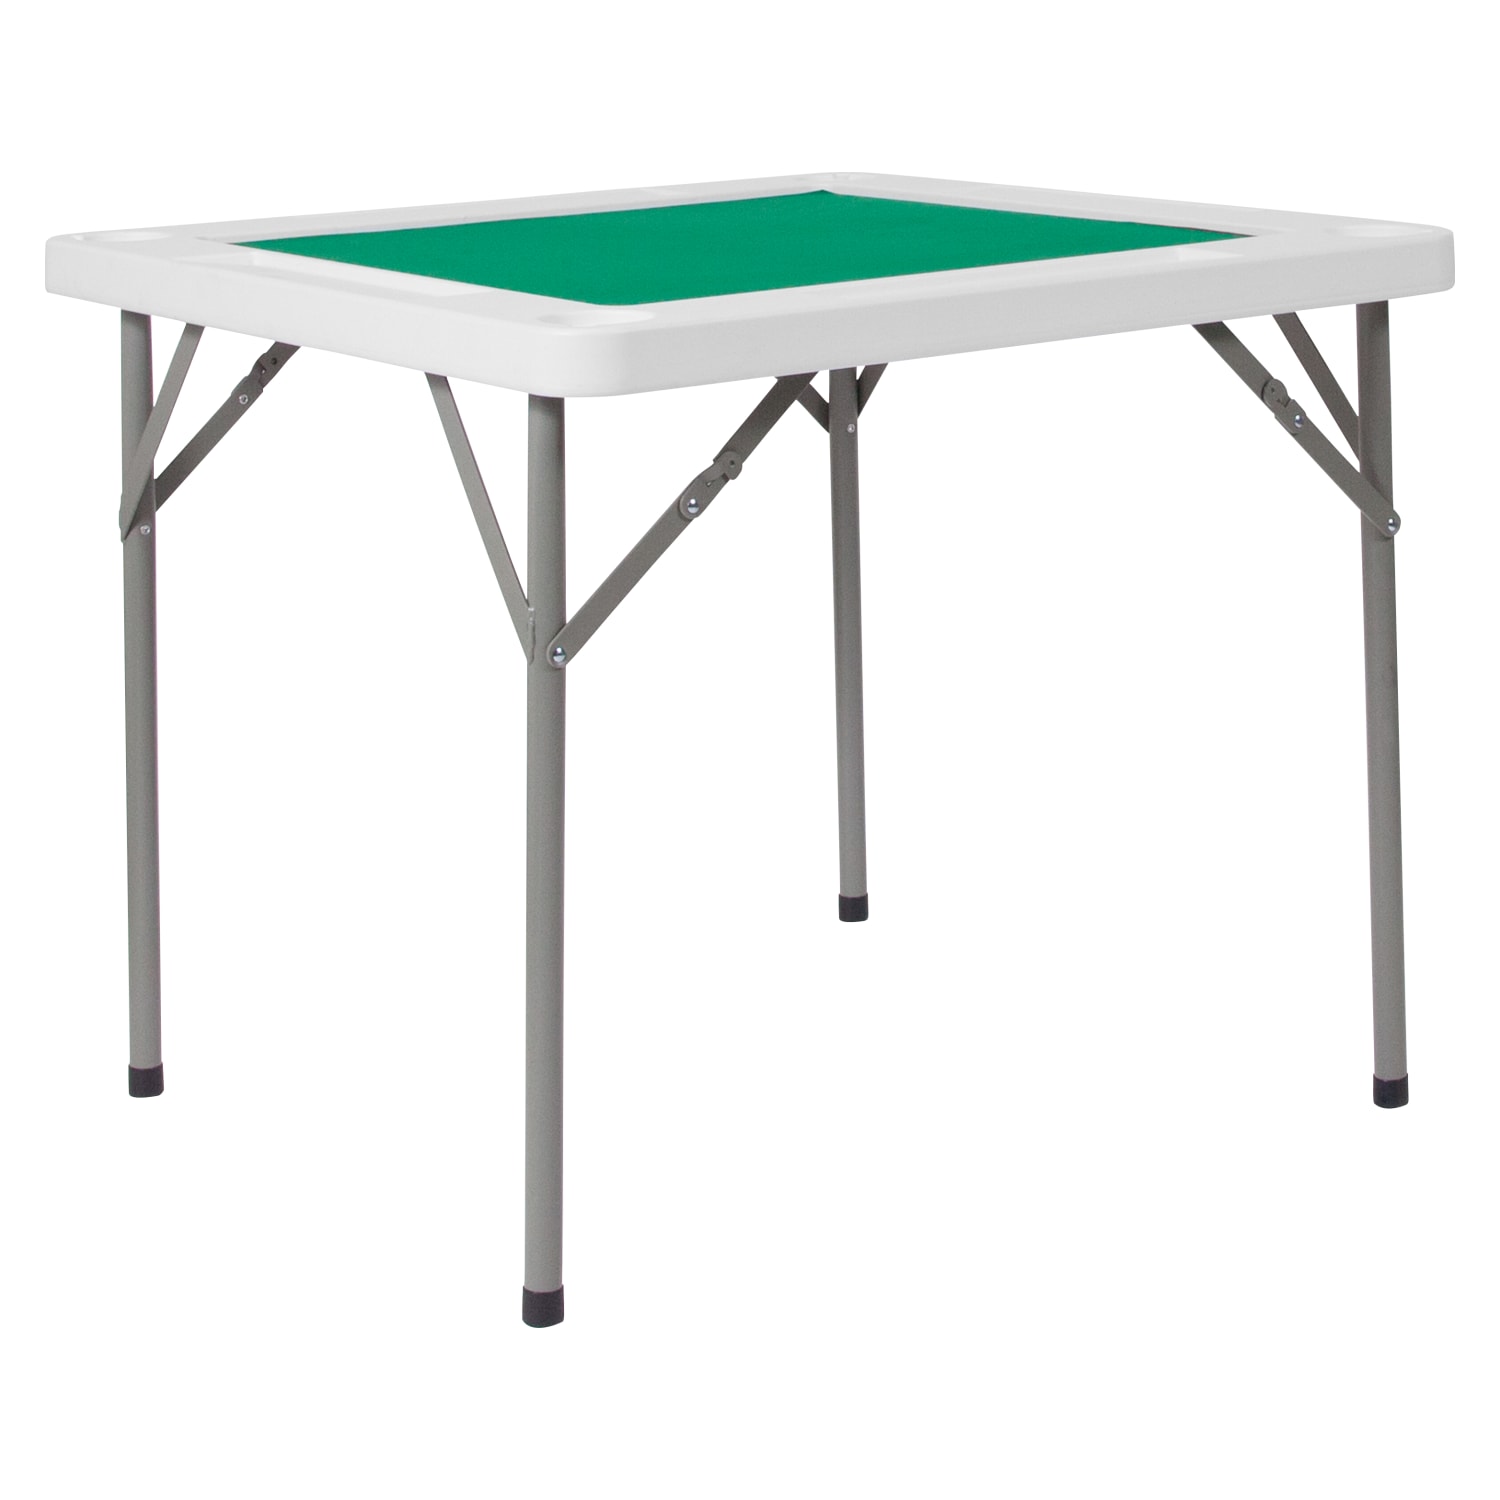 34.5” Square 4-Player Folding Card Game Table with Green Playing Surface and Cup Holders